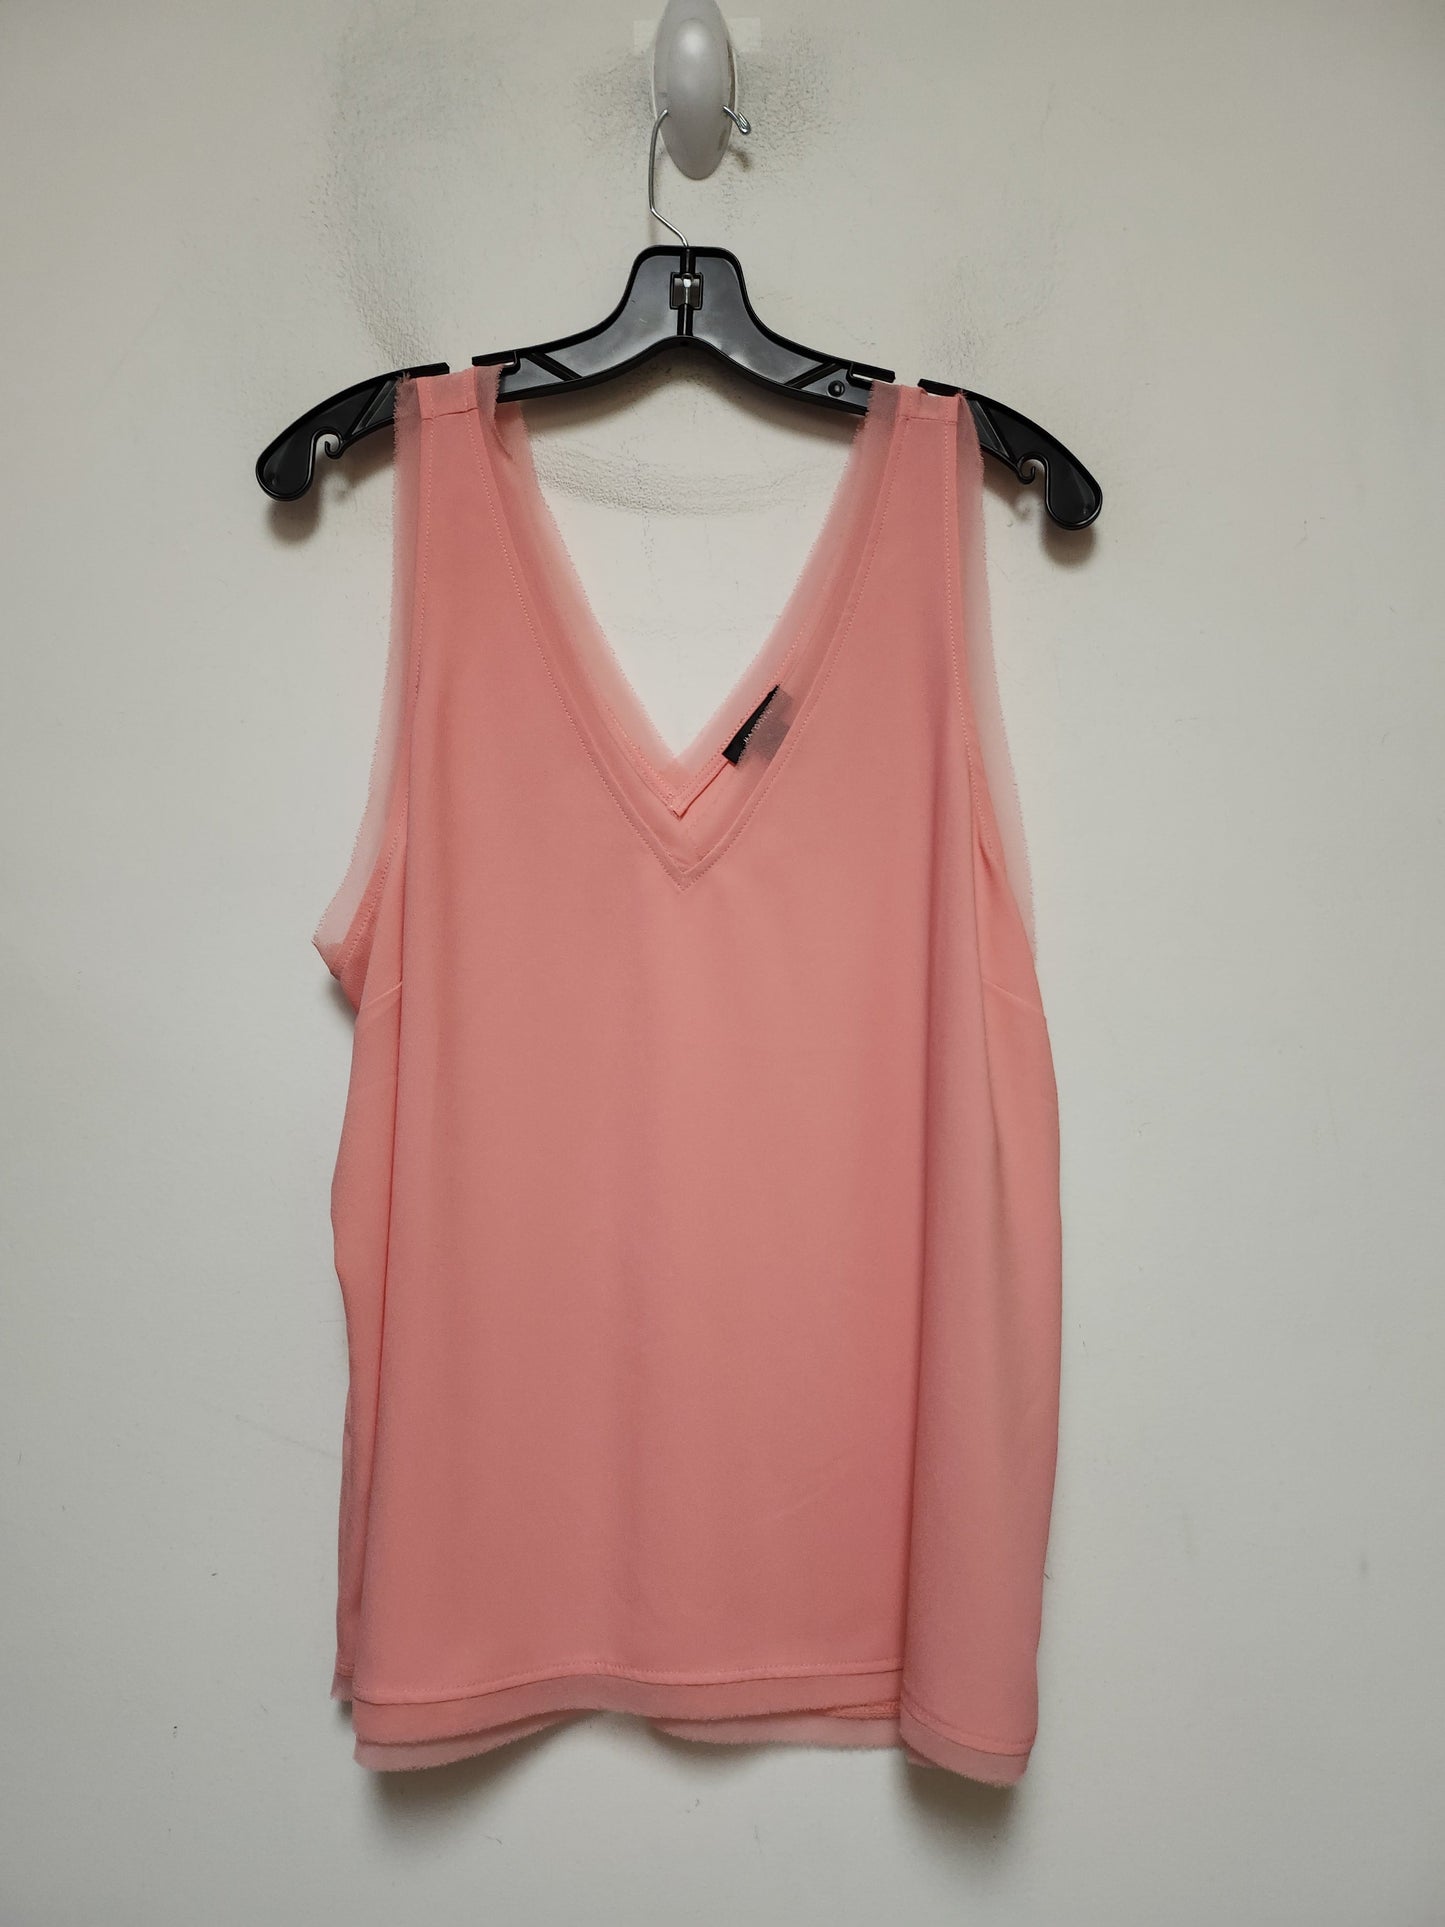 Coral Top Sleeveless Halogen, Size Xl